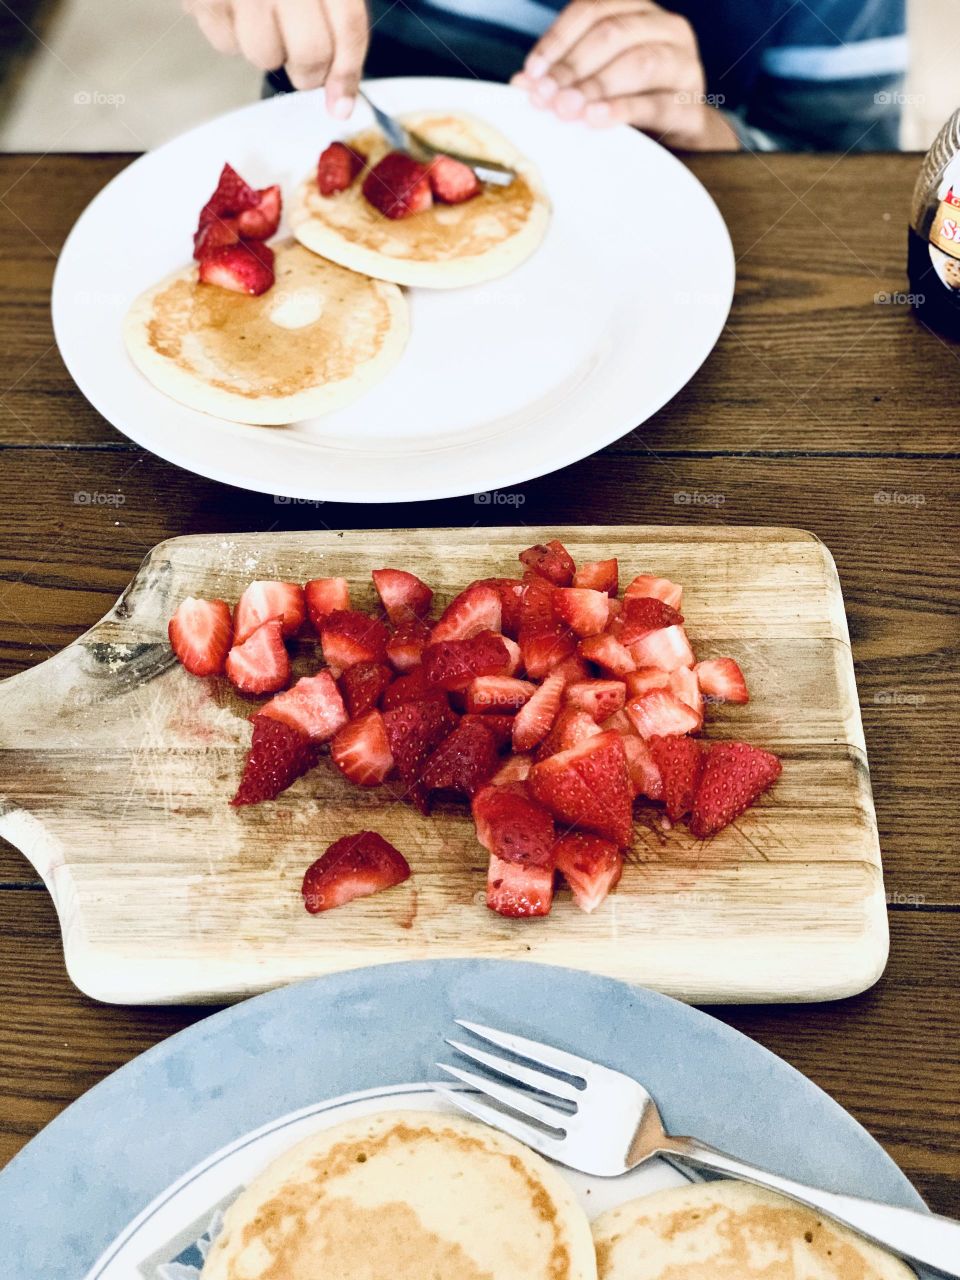 Breakfast time and healthy eating pancakes and strawberries 